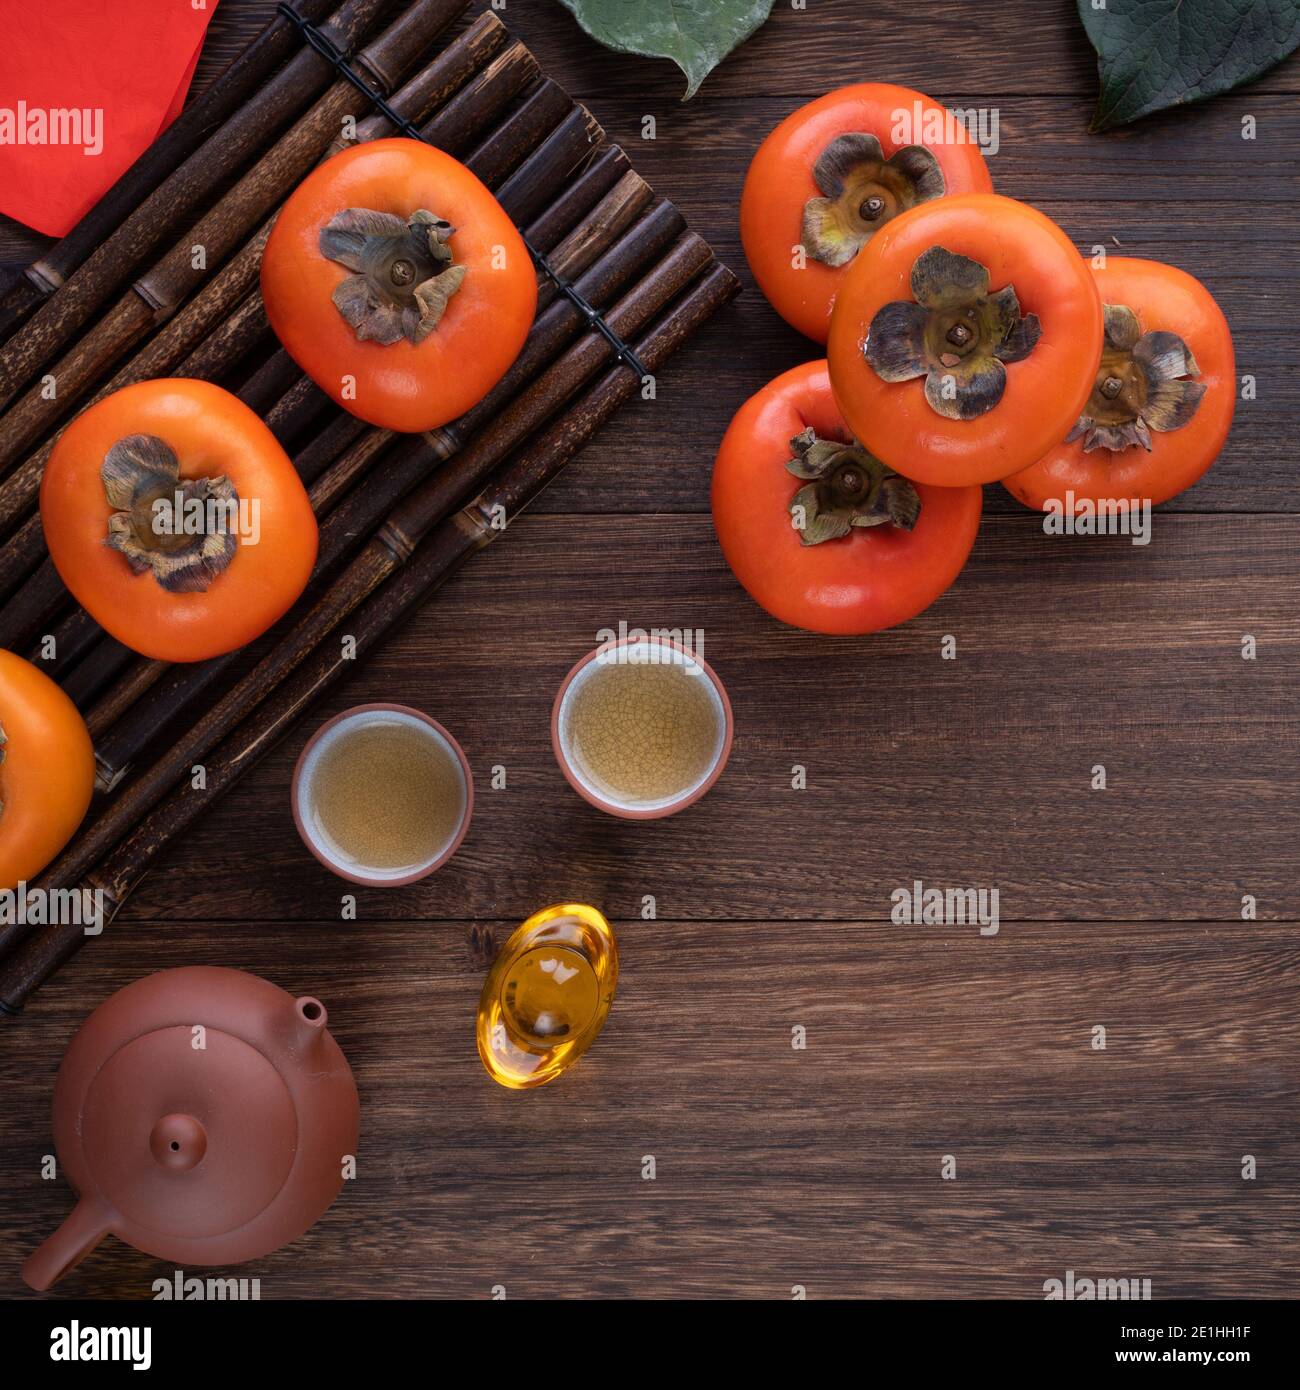 Top view of fresh sweet persimmons kaki with leaves on wooden table background for Chinese lunar new year fruit design concept, the word means blessin Stock Photo